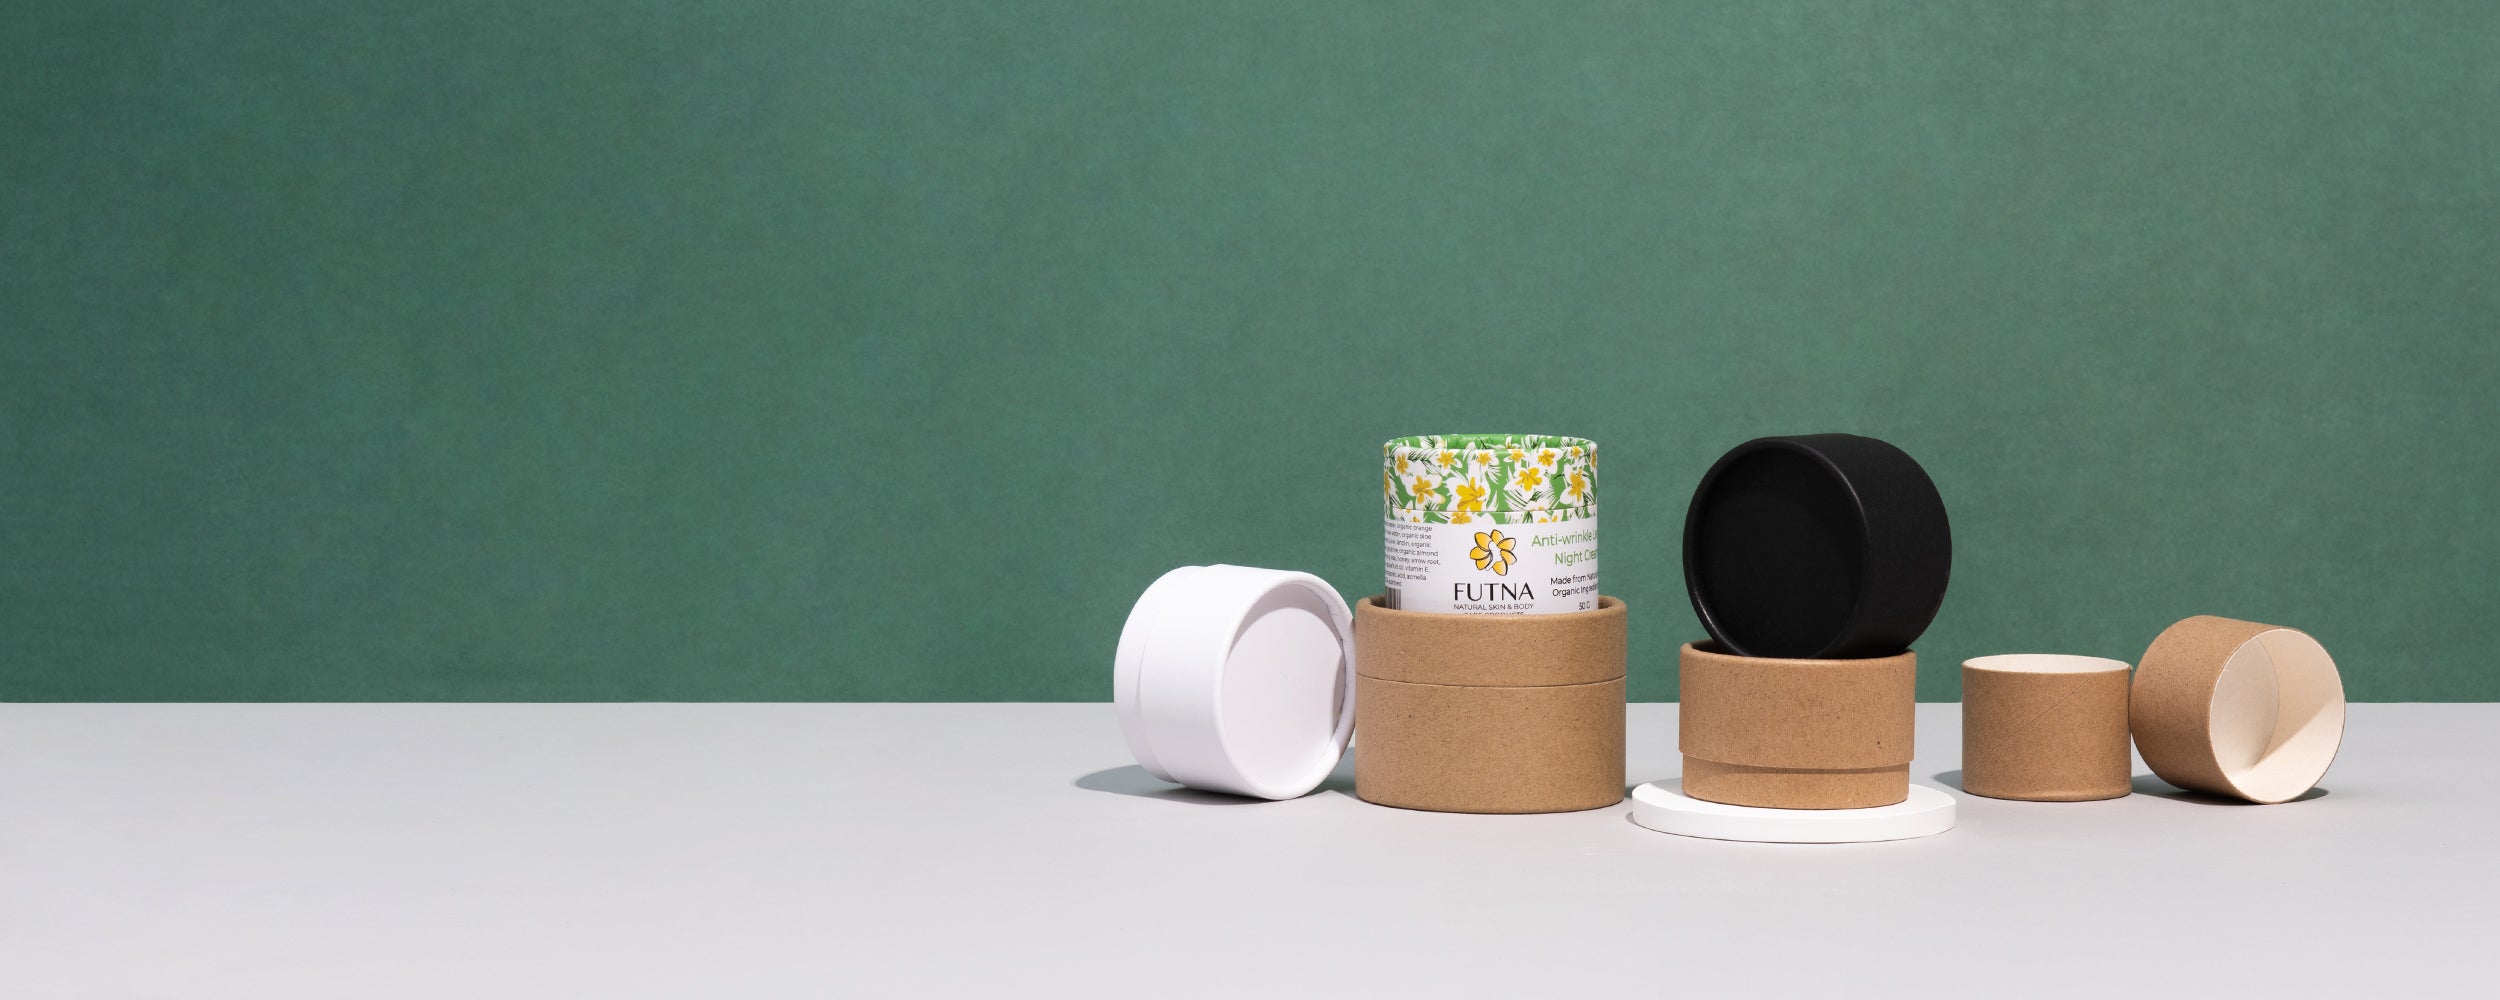 An array of cylindrical paper tubes in white and natural cardboard colors, with one featuring a floral design with customized logo, arranged on a two-tone surface against a green backdrop.